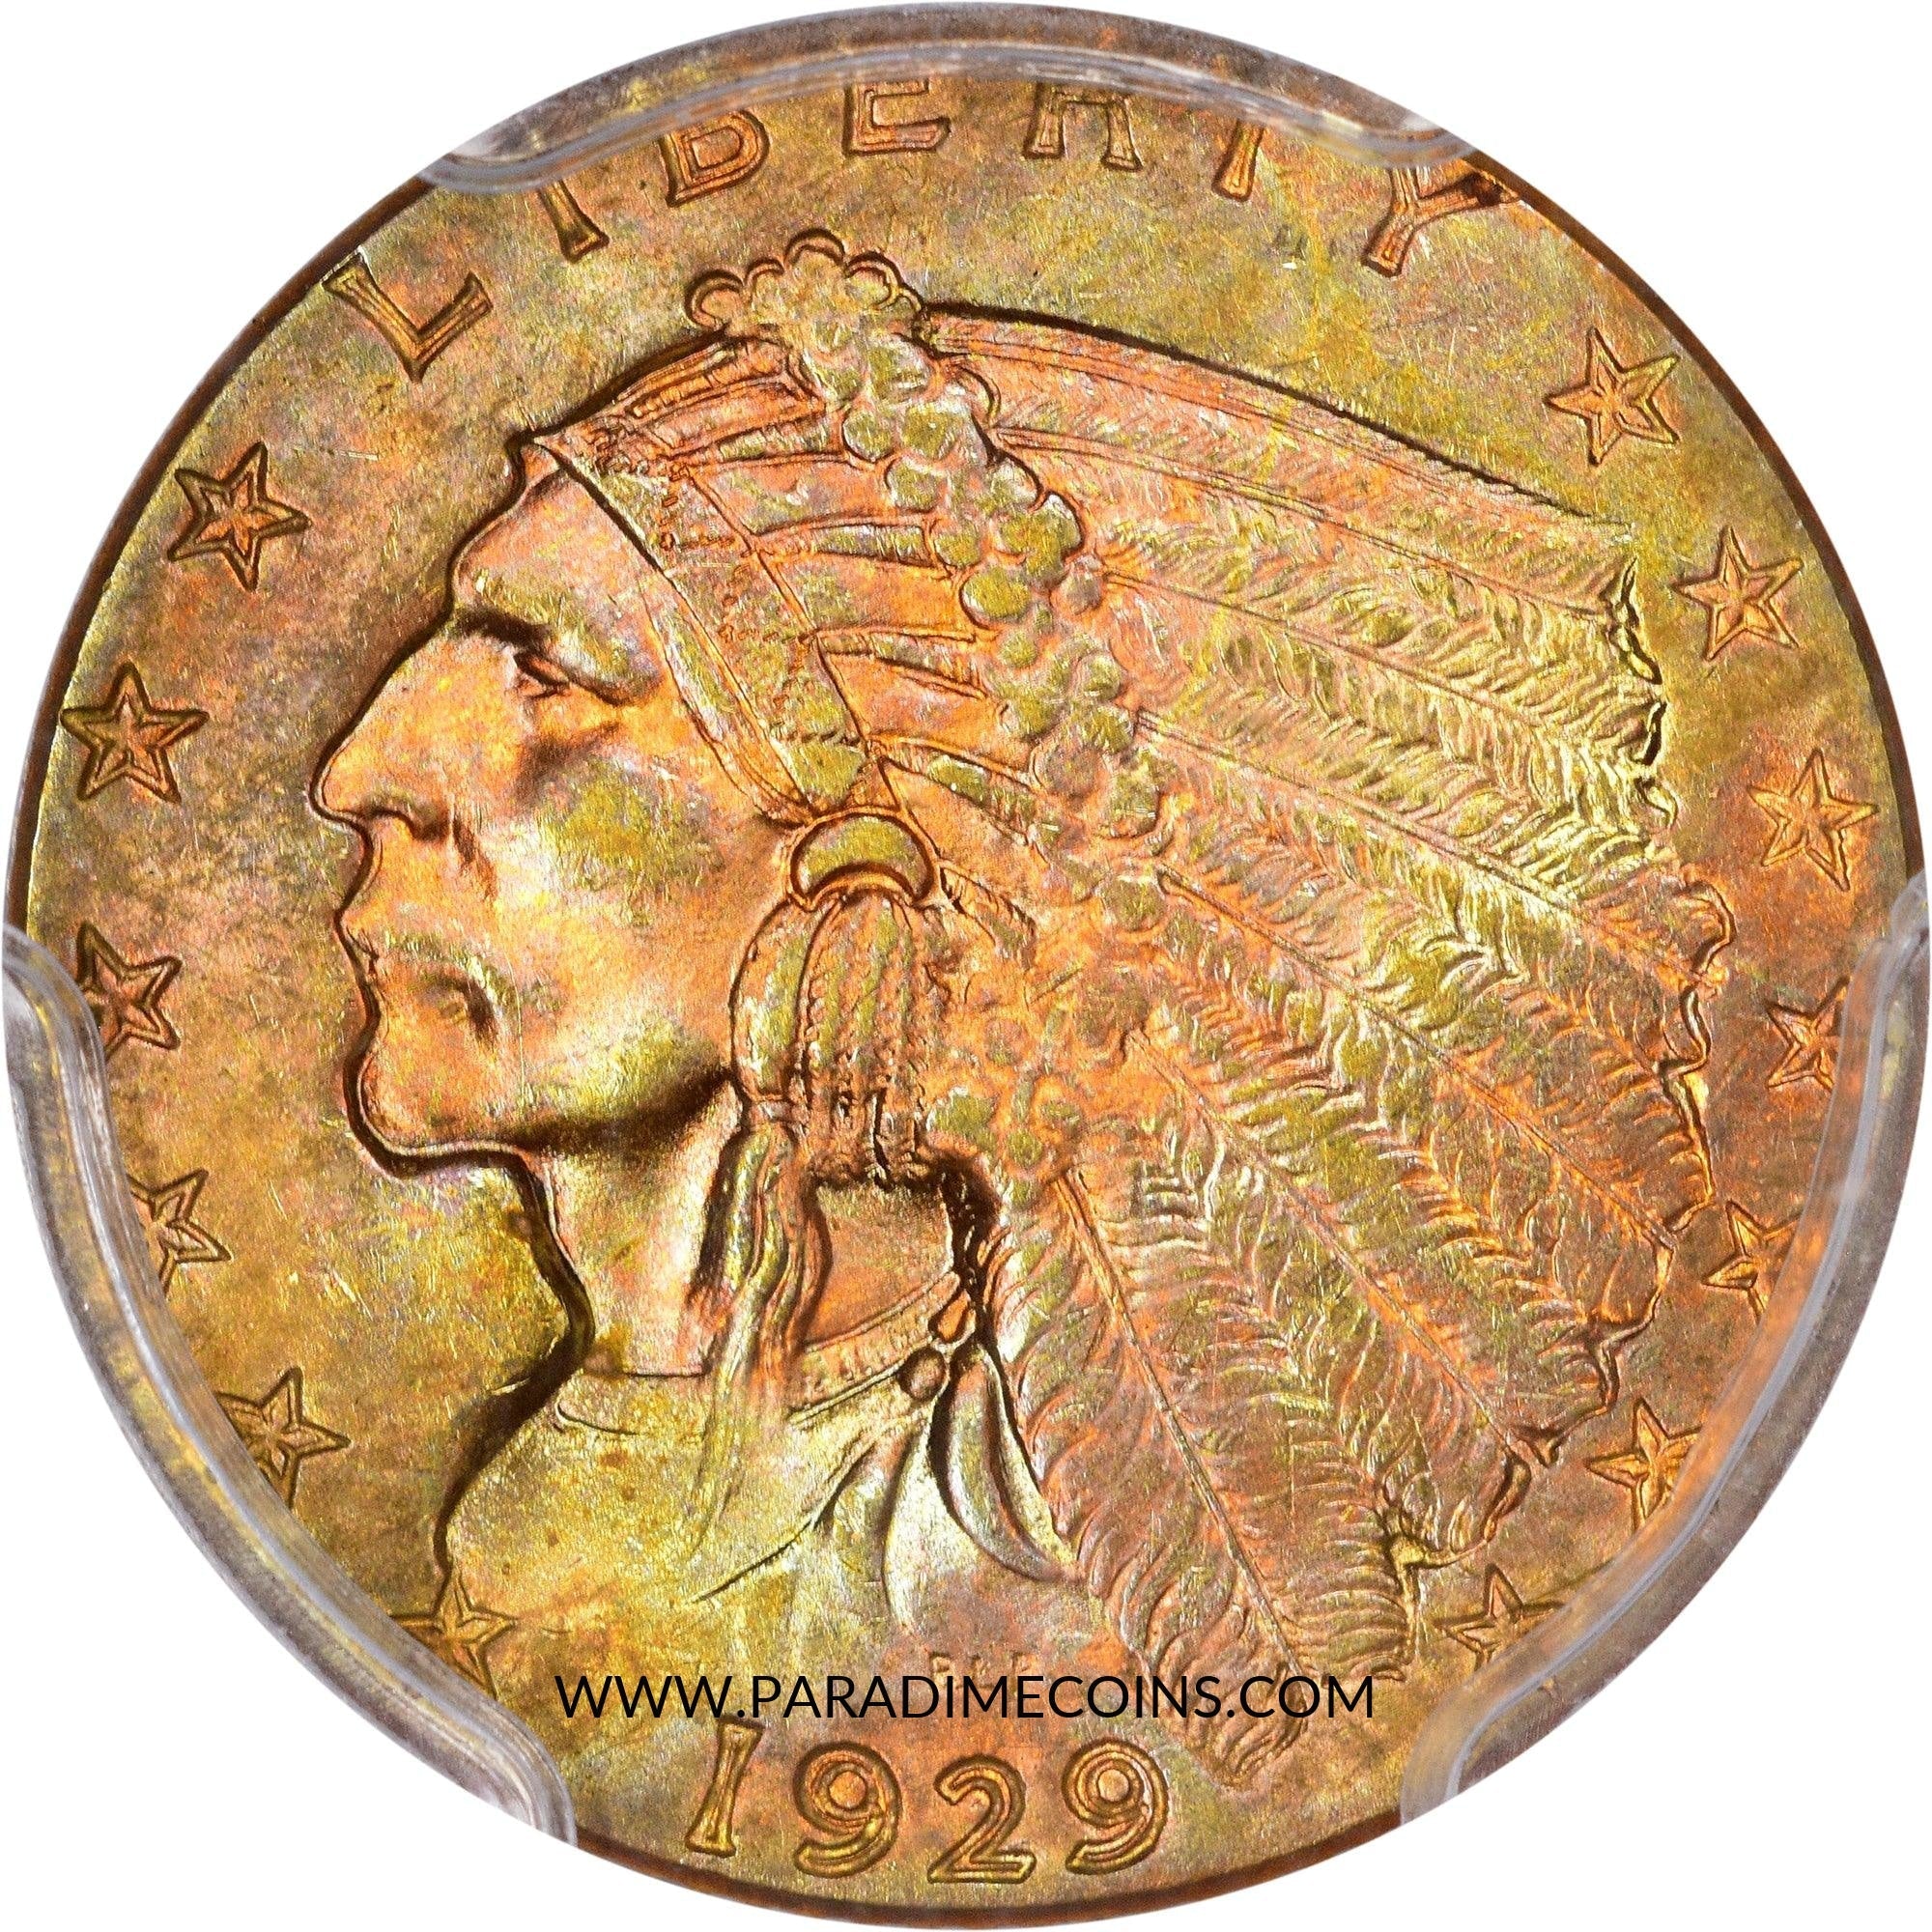 1929 $2.5 MS63 PCGS - Paradime Coins | PCGS NGC CACG CAC Rare US Numismatic Coins For Sale